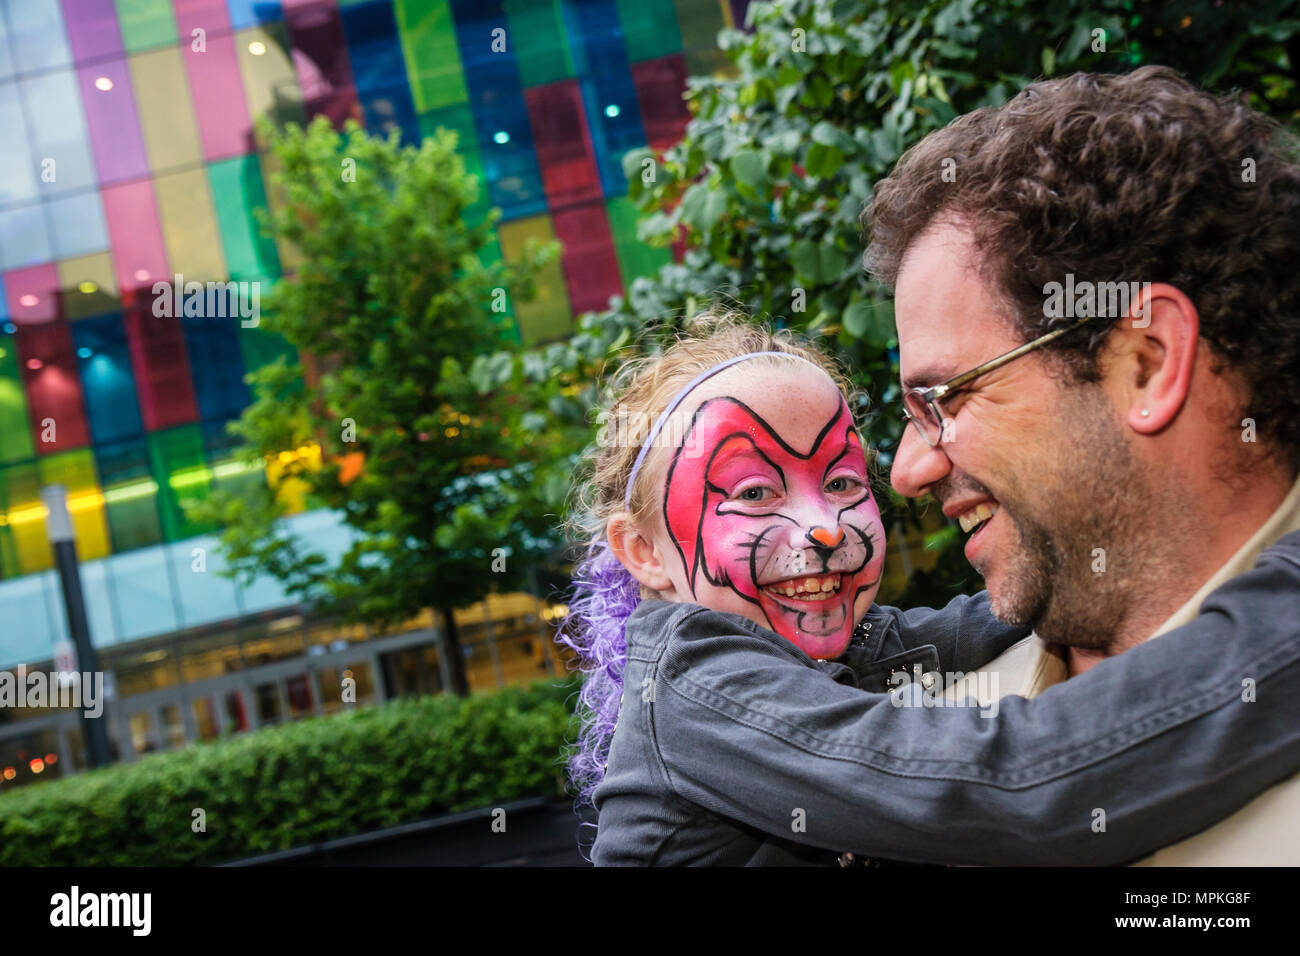 Montreal Canada,Quebec Province,Palais de Congrès,Convention Centre,Jean Paul Riopelle Square,smiling girl,girls,child,painted face painting,father,pa Stock Photo